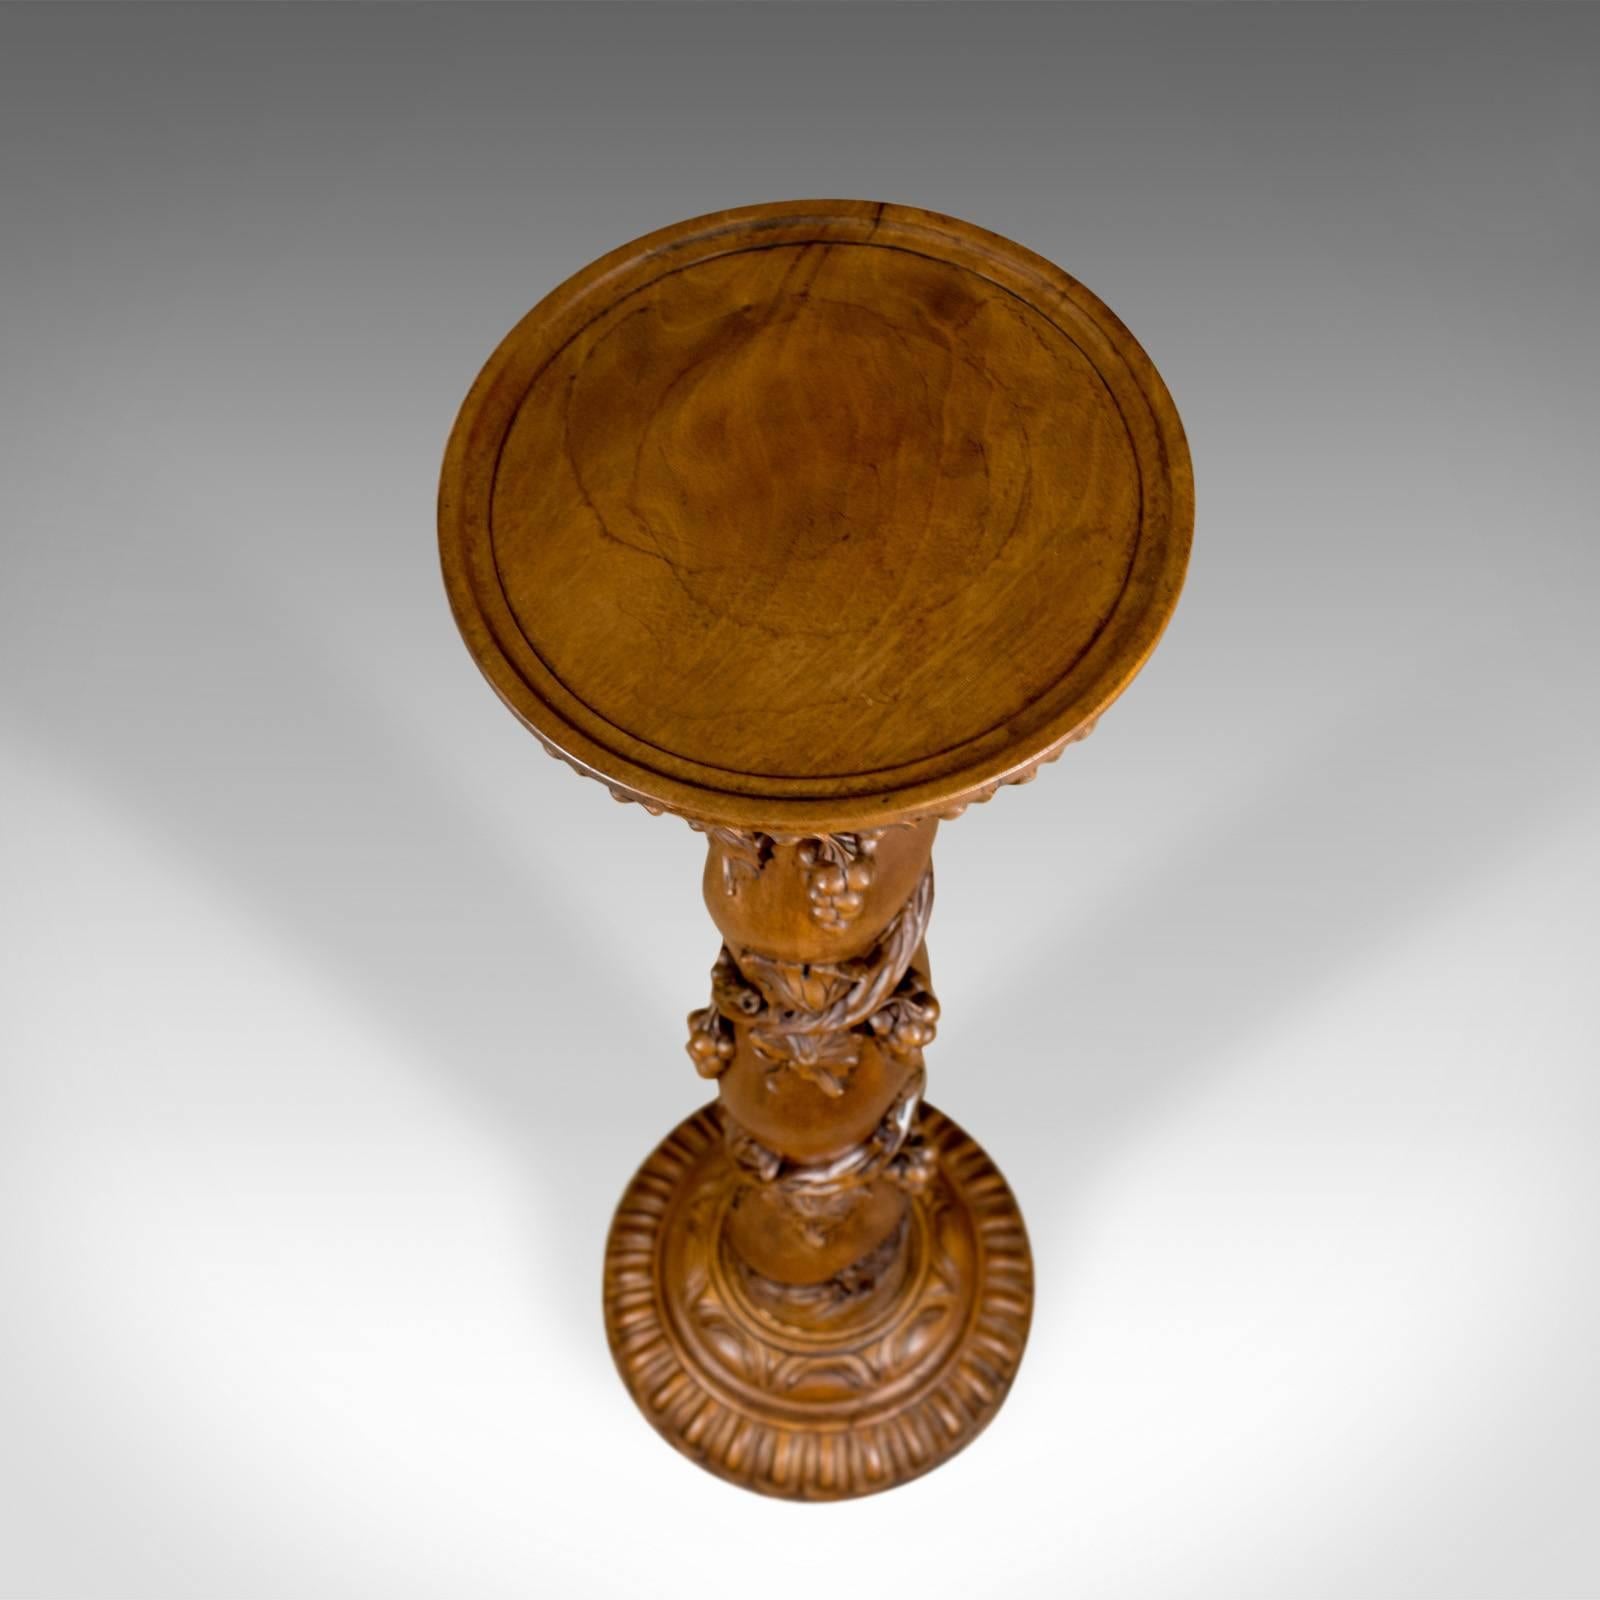 This is a midcentury plant stand, an English, mahogany torchère or pedestal decorated with carved grape vine.

Superb carved detail to this robust pedestal plant stand
Well executed, deep relief and pierced carved grape vine decoration
Winding